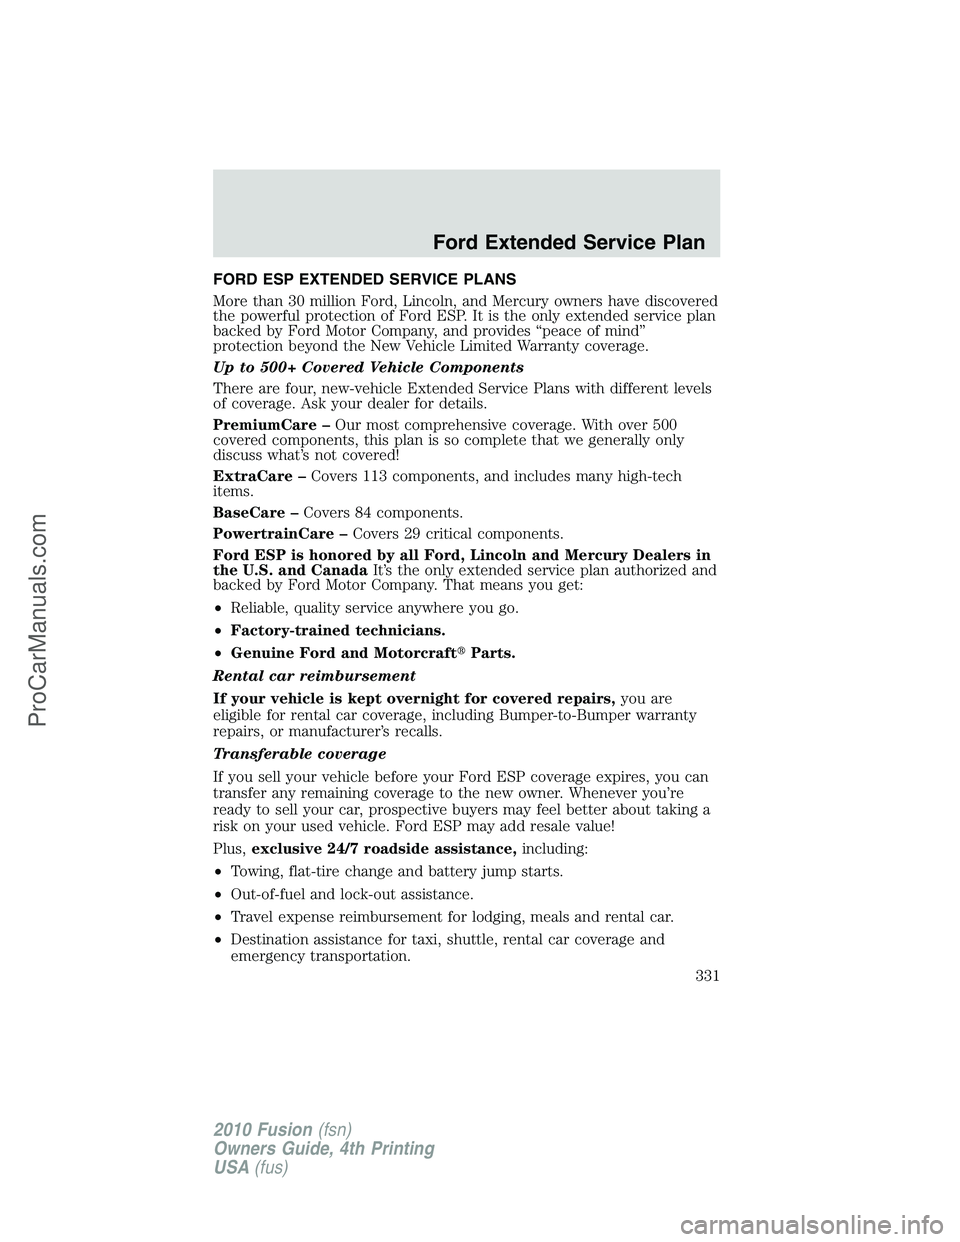 FORD FUSION 2010  Owners Manual FORD ESP EXTENDED SERVICE PLANS
More than 30 million Ford, Lincoln, and Mercury owners have discovered
the powerful protection of Ford ESP. It is the only extended service plan
backed by Ford Motor Co